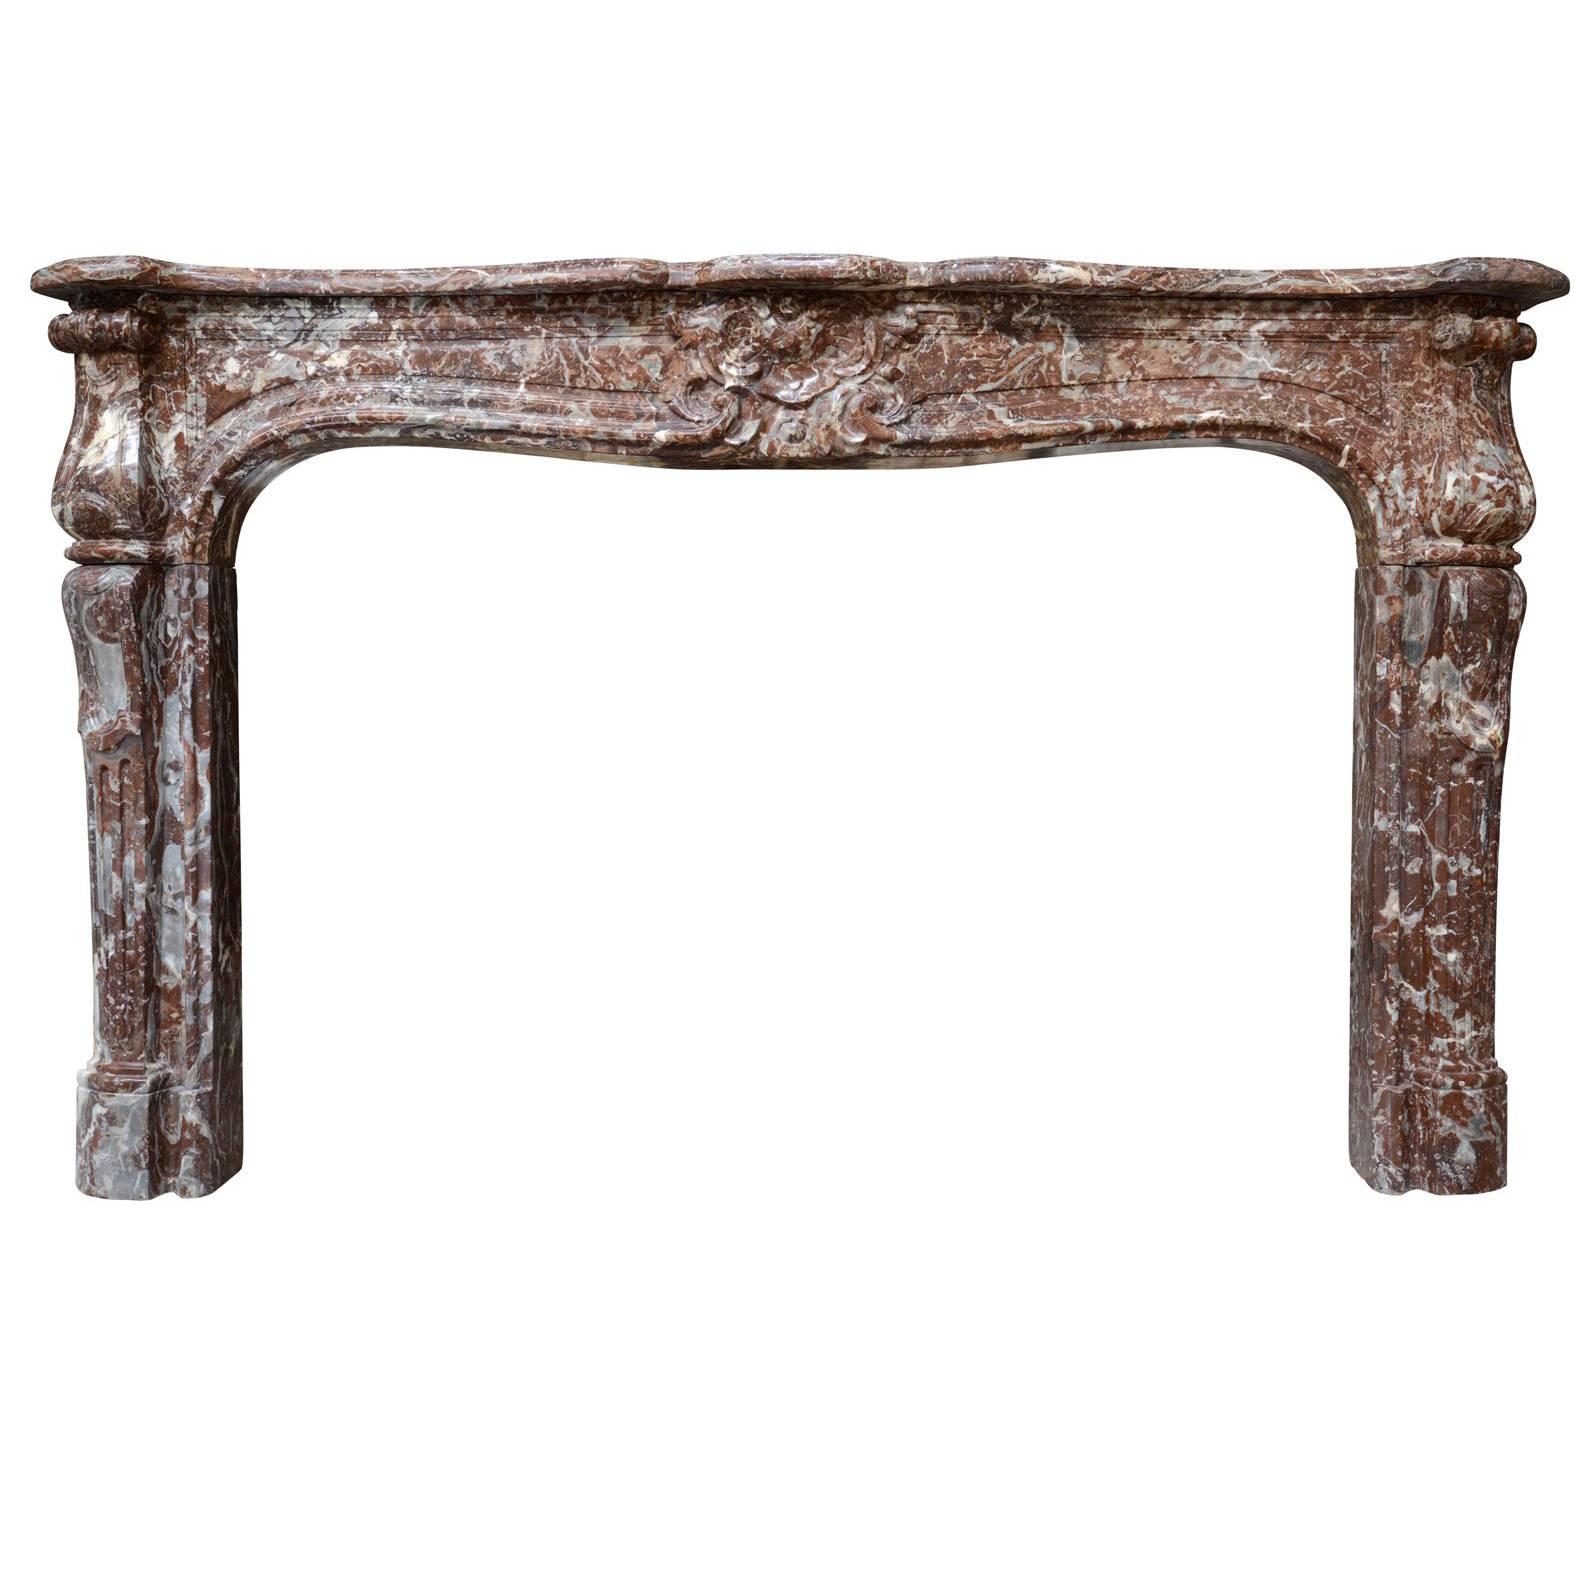 Louis XV Period Belgium Rance Marble Fireplace, 18th Century For Sale